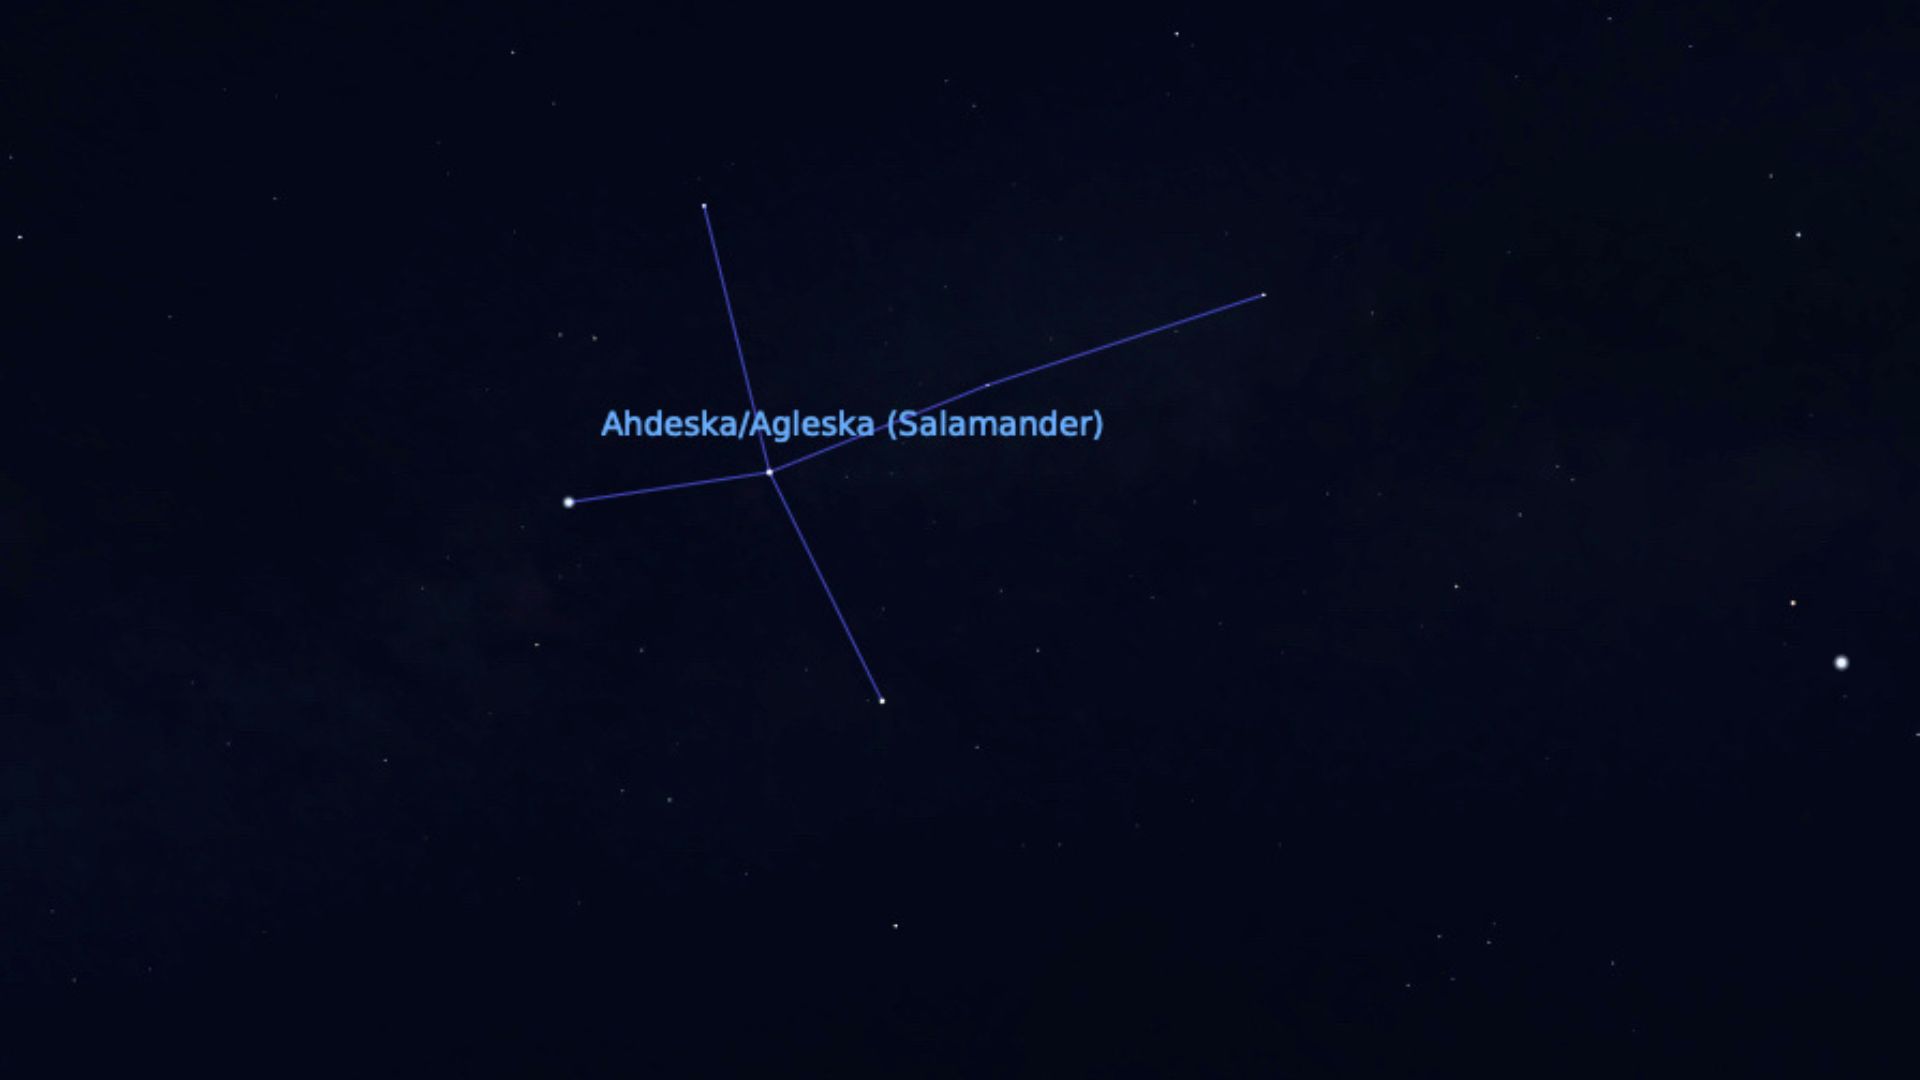 graphic illustration from Stellarium showing the salamander constellation in the night sky.